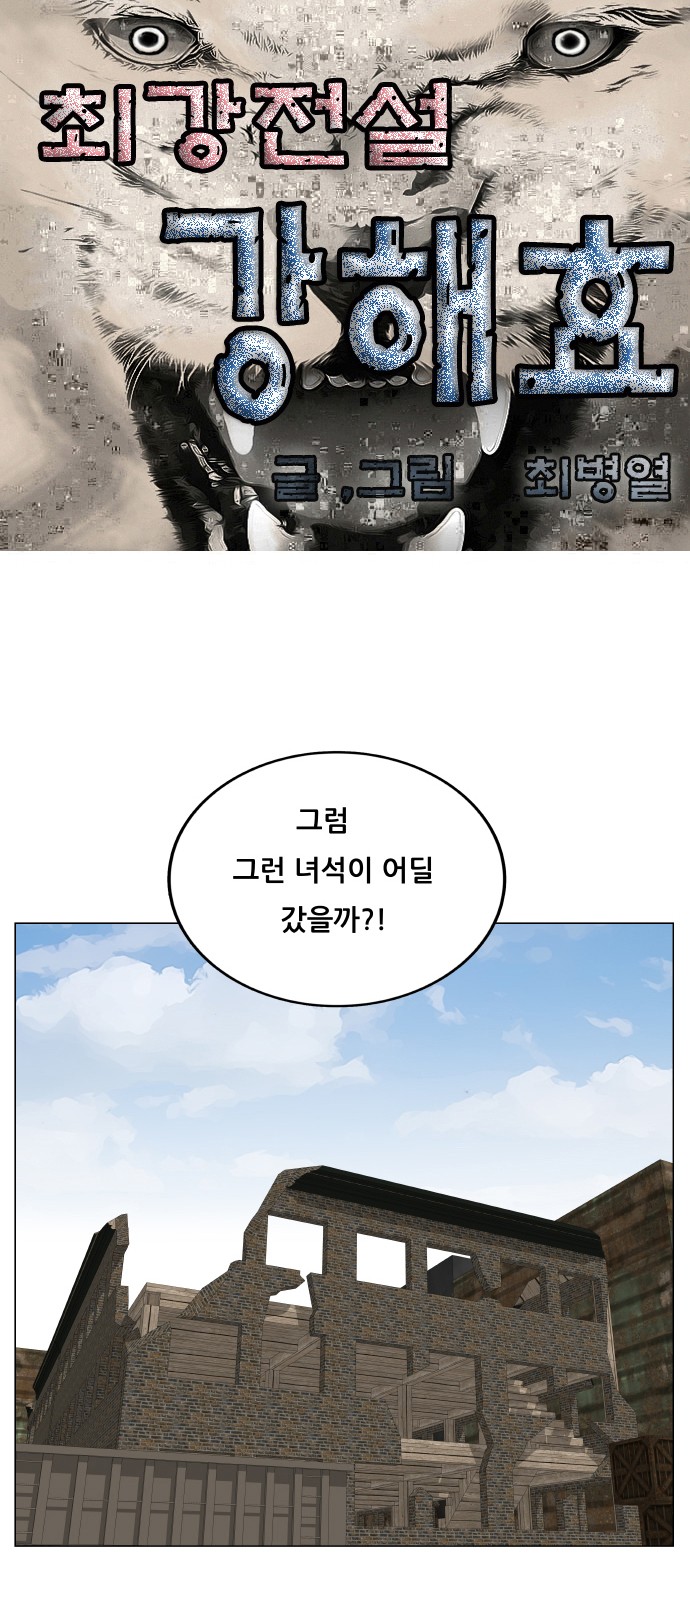 Ultimate Legend - Kang Hae Hyo - Chapter 391 - Page 1